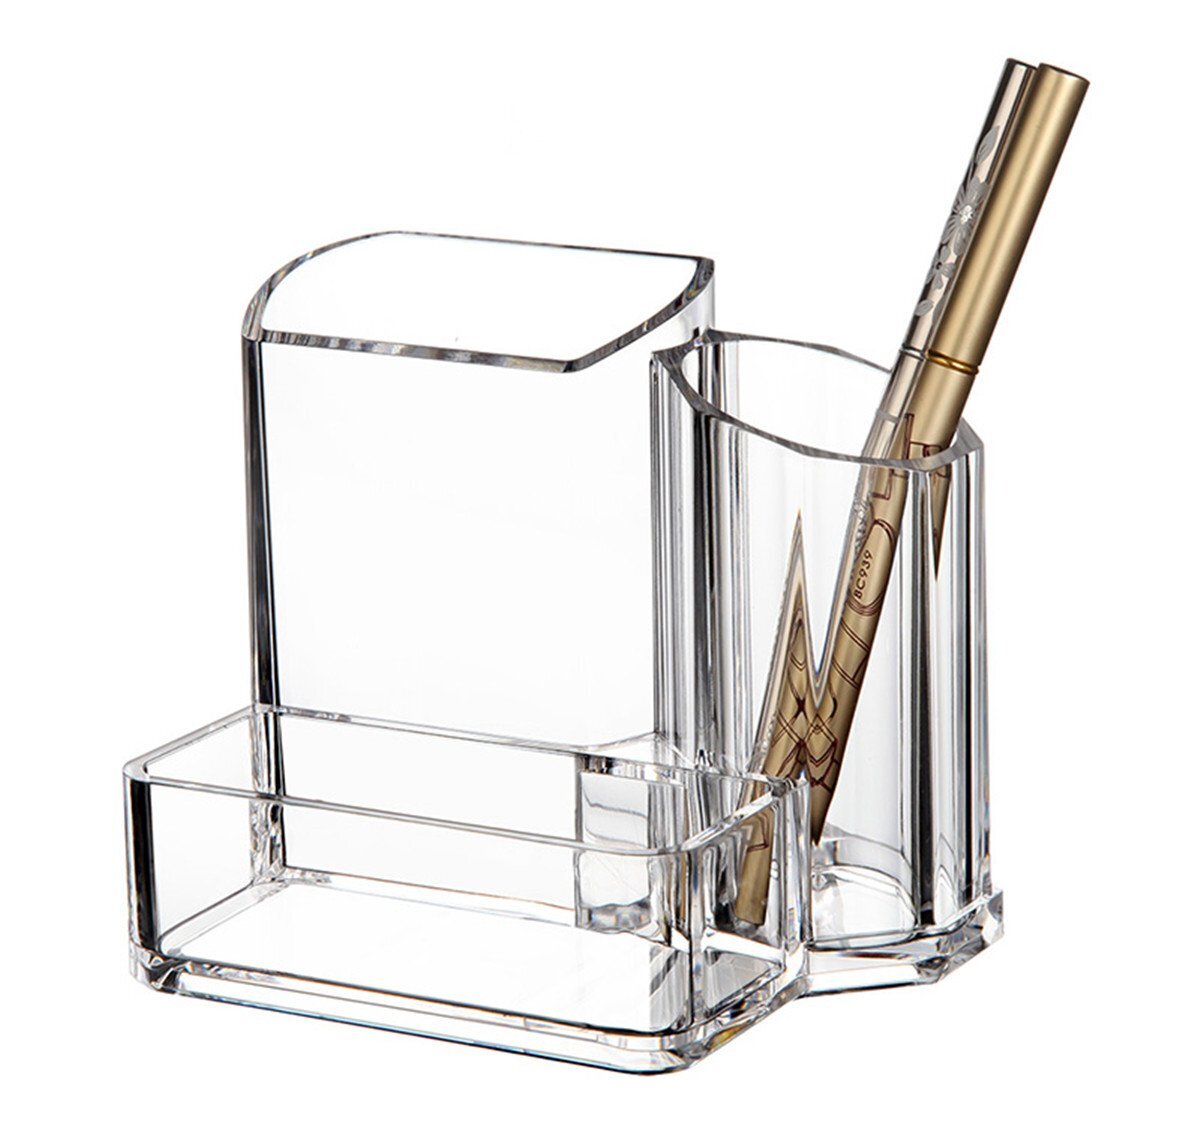 Clear Acrylic Desk Organizer Pen Holder with Business Card Holder